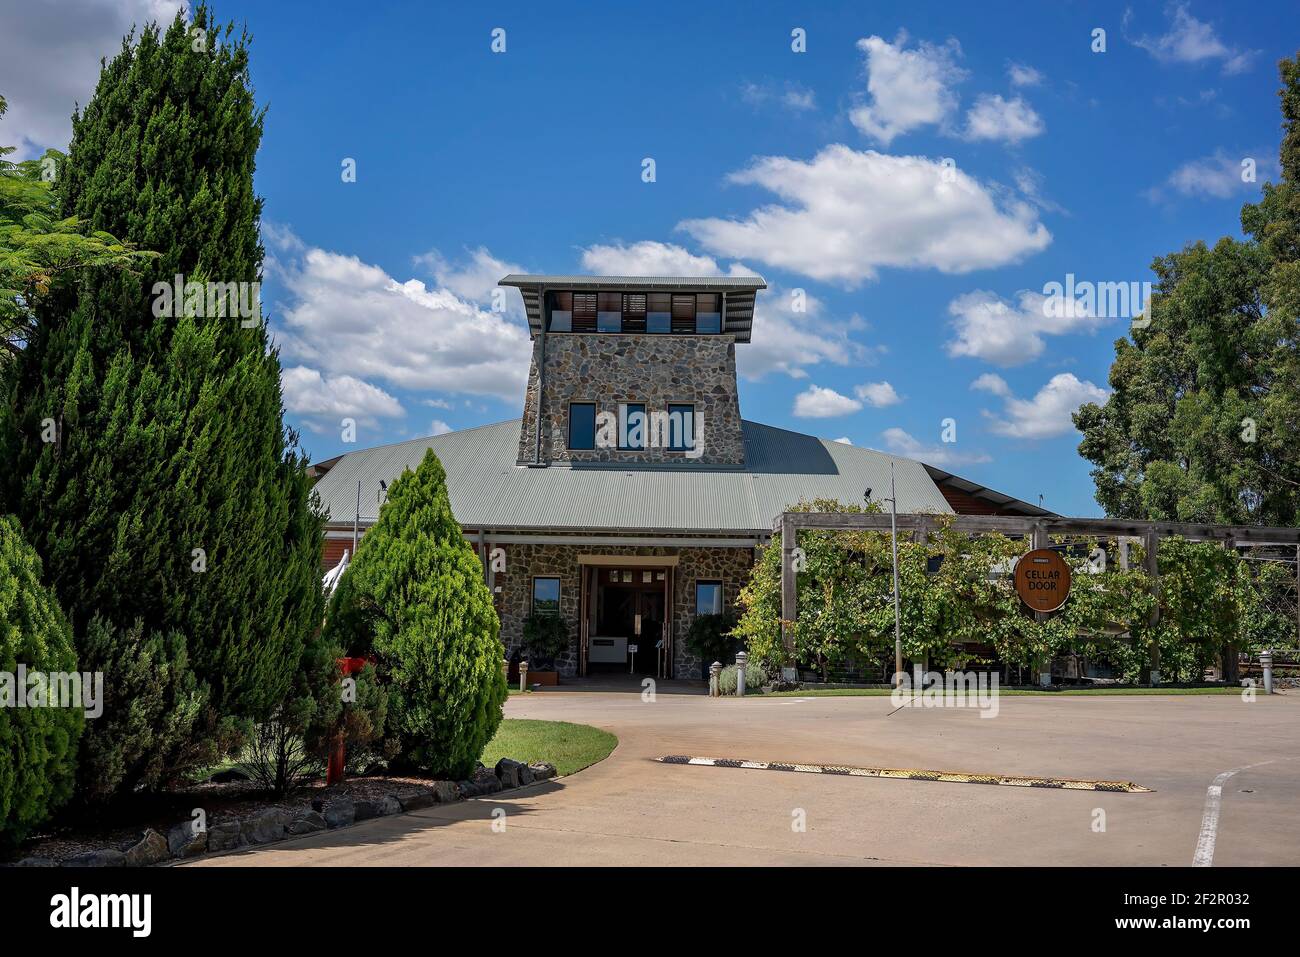 Brisbane, Queensland, Australia - March 2021: A well known winery cellar door building for wine sales and tasting Stock Photo